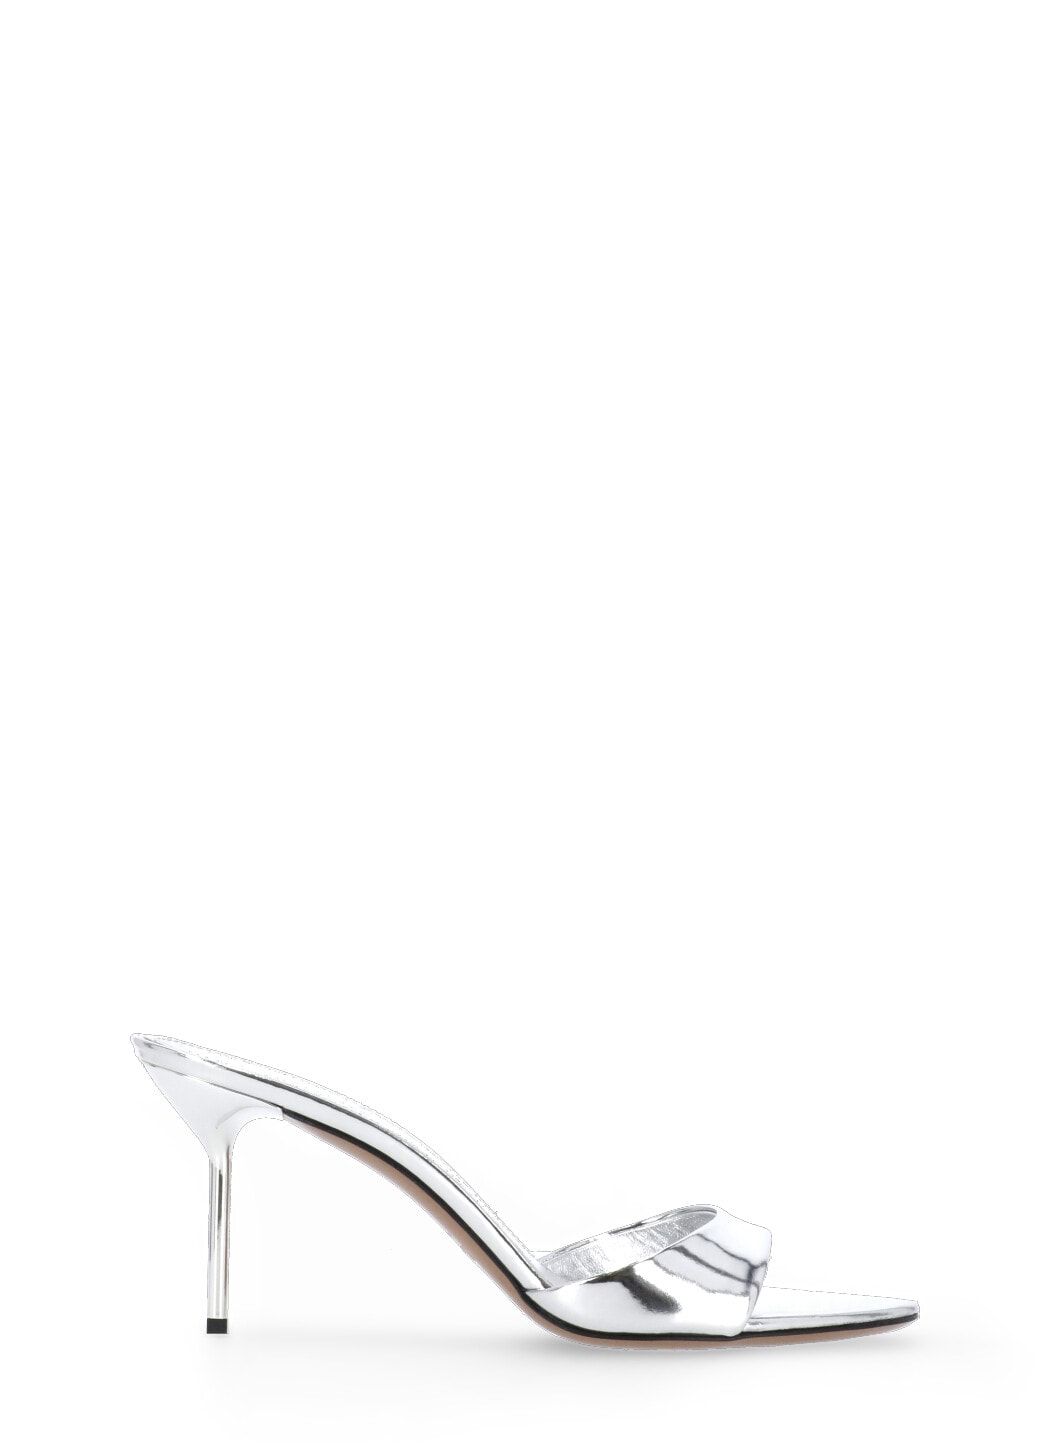 Paris Texas Lidia Heeled Shoes In Silver